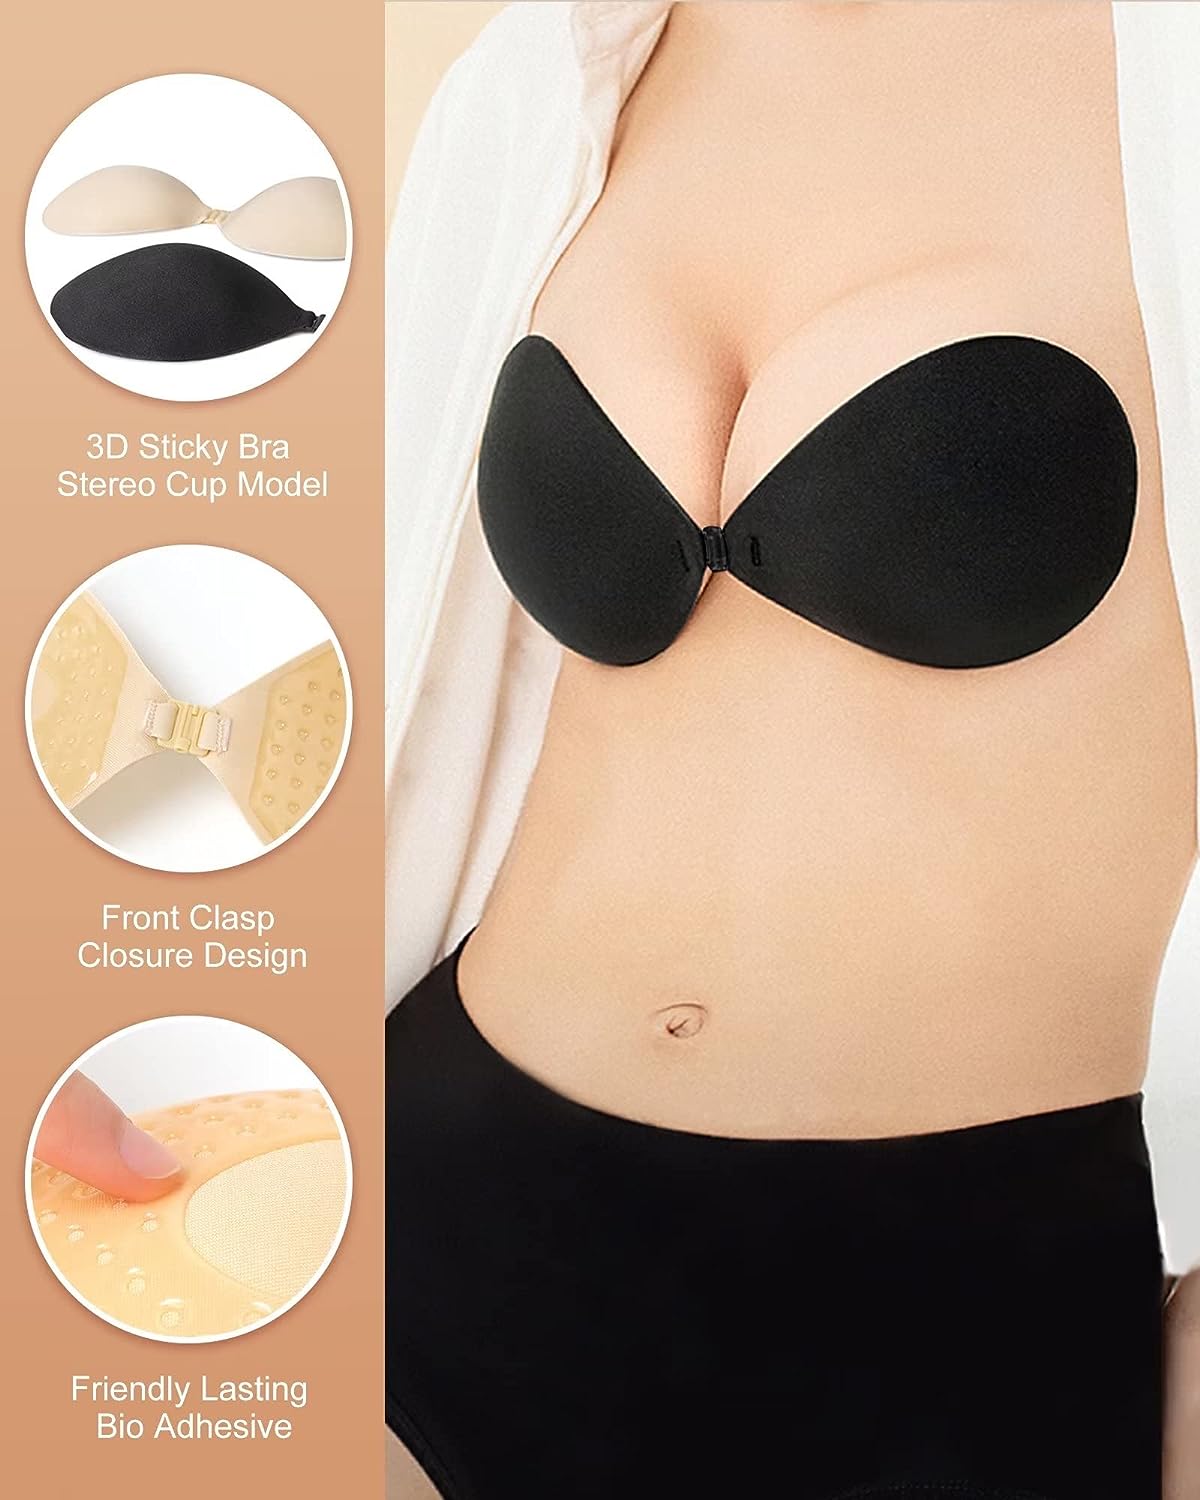 Adhesive Bra Push Up for Women 2 Pair, Sticky Invisible Lifting Bra, Backless Strapless Bras for Dress with Pasties